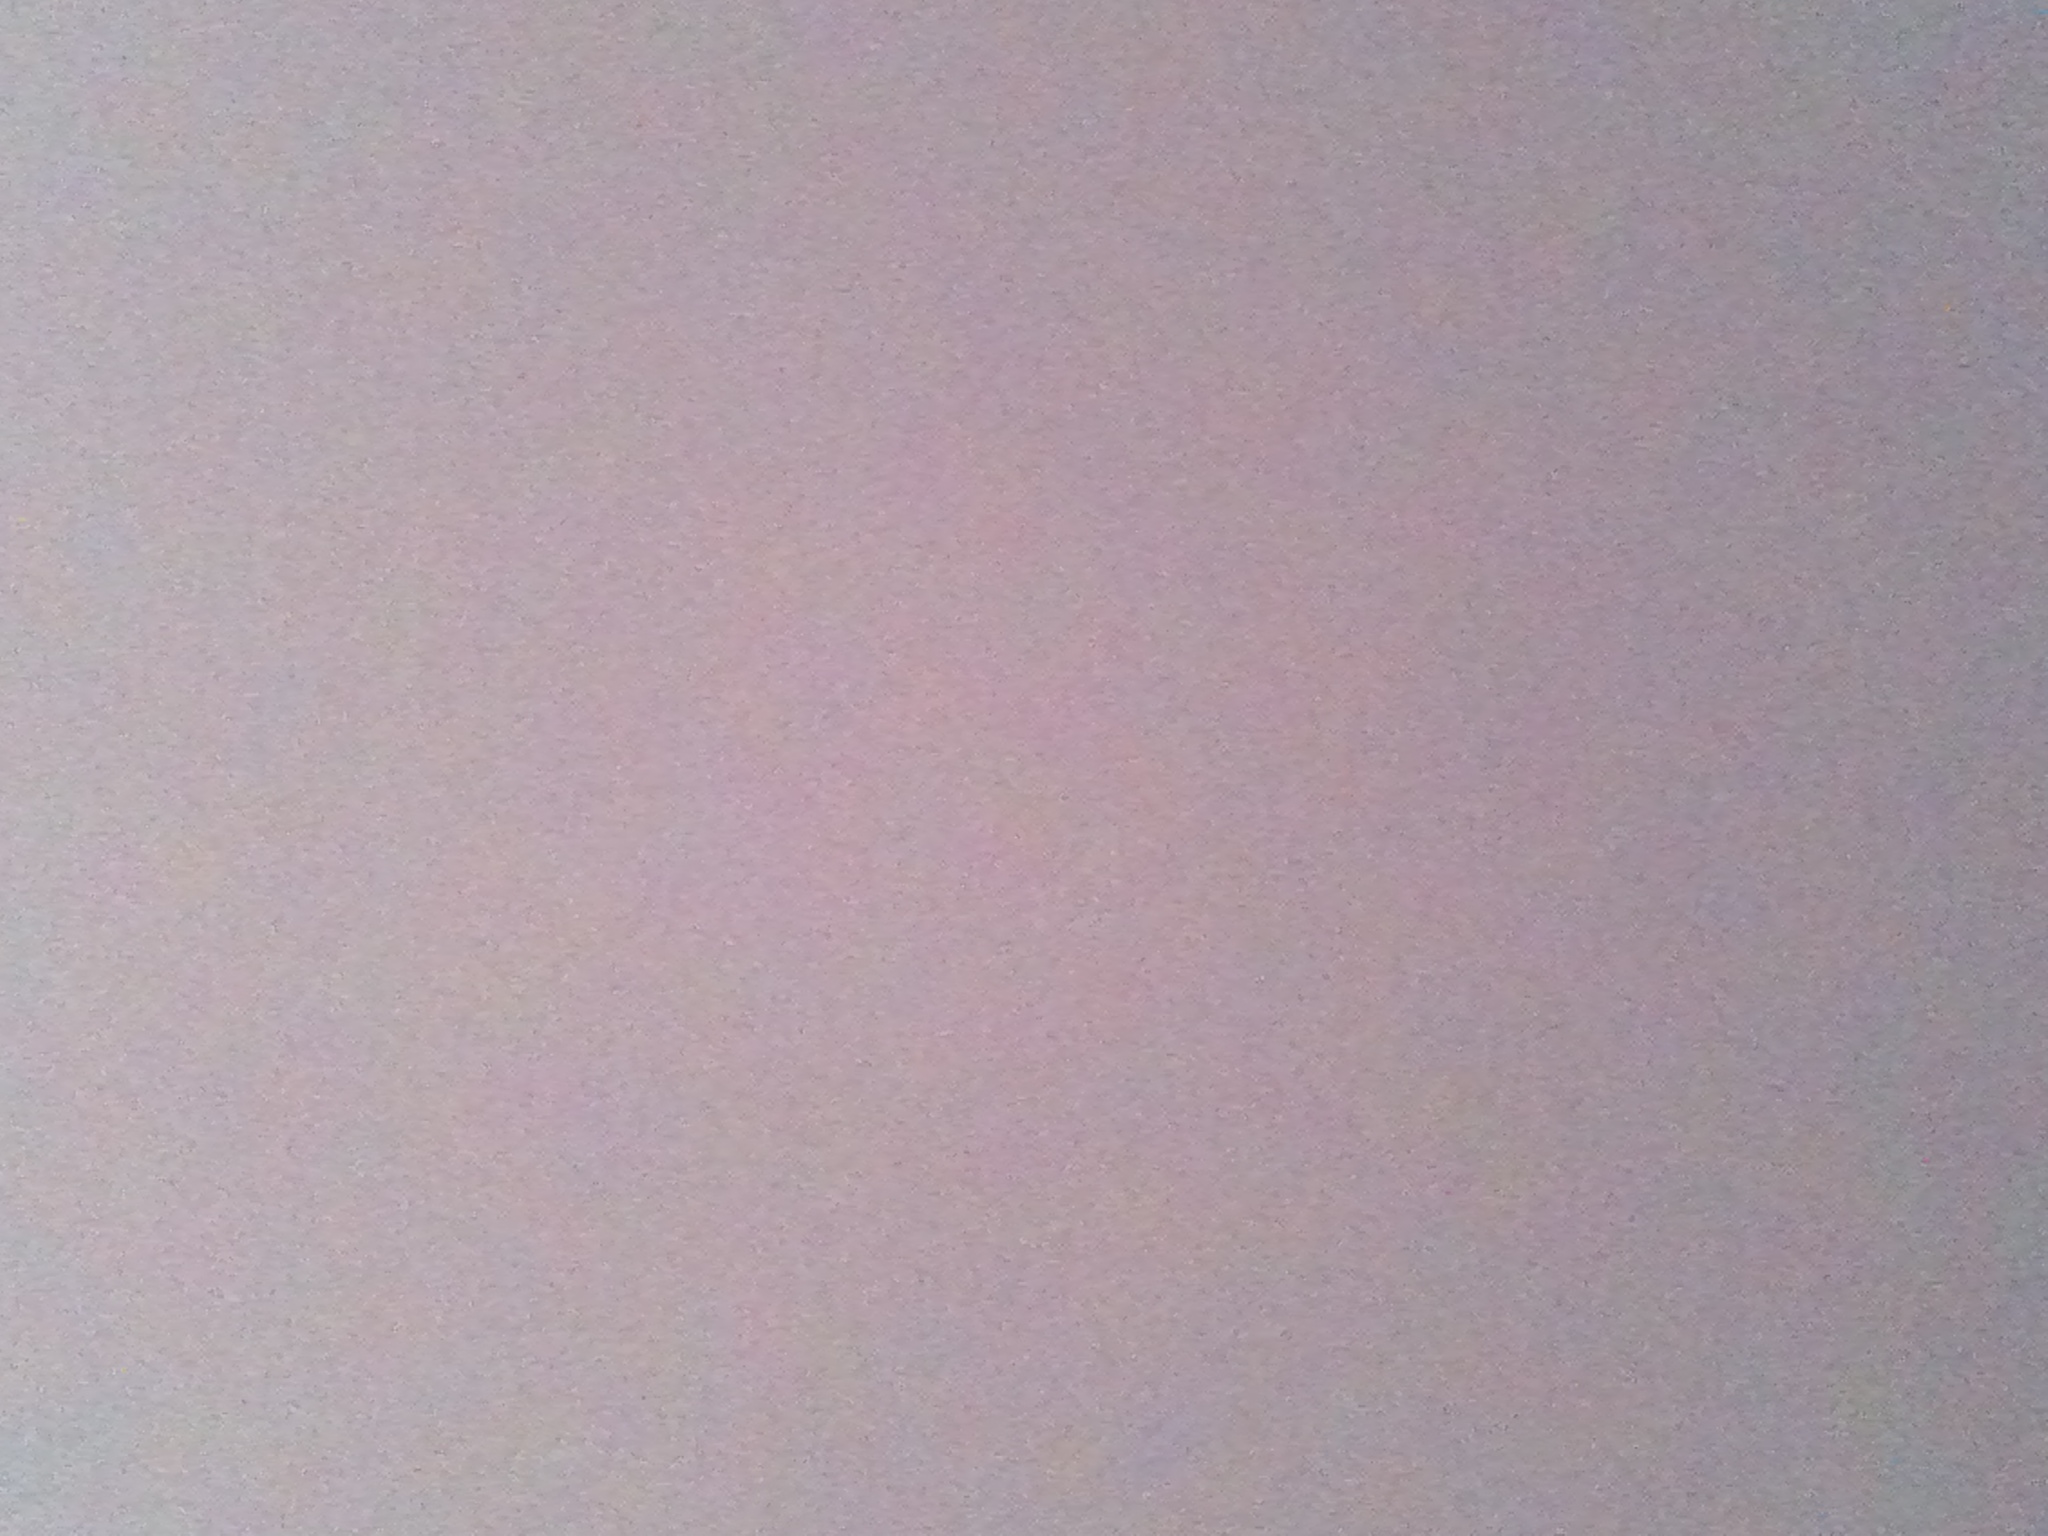 0.about:timeline:2012:iphone:img-0041.jpg